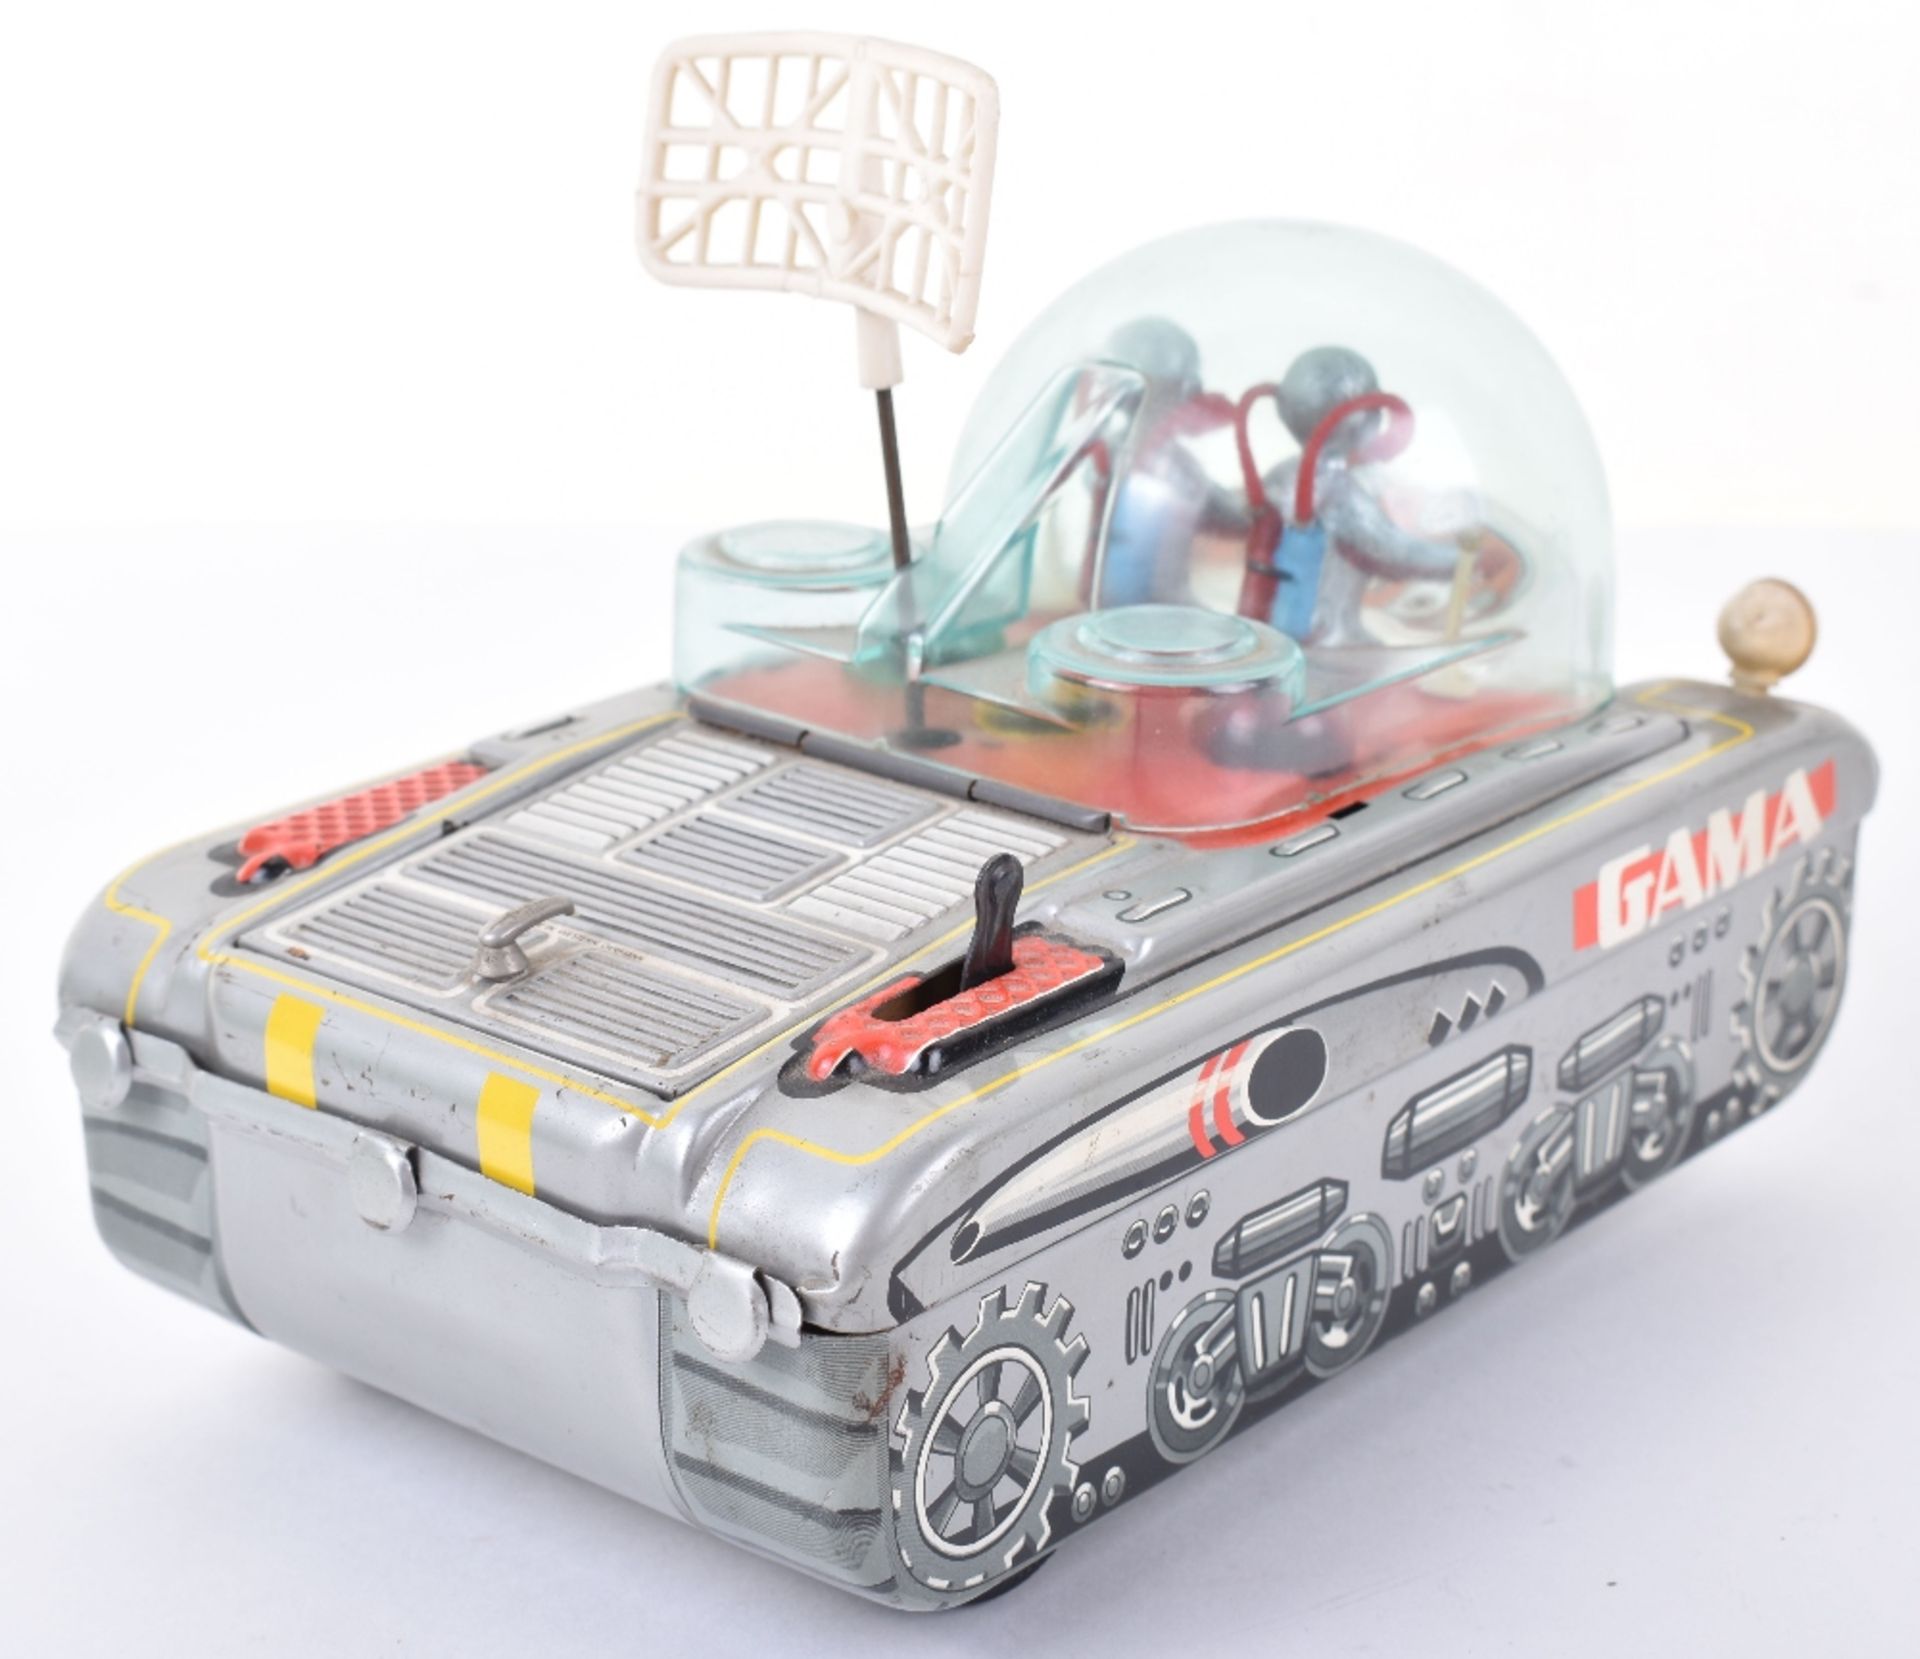 Gama 9940 XY-101 Space Tank tinplate battery operated toy, Western Germany 1960s - Image 3 of 4